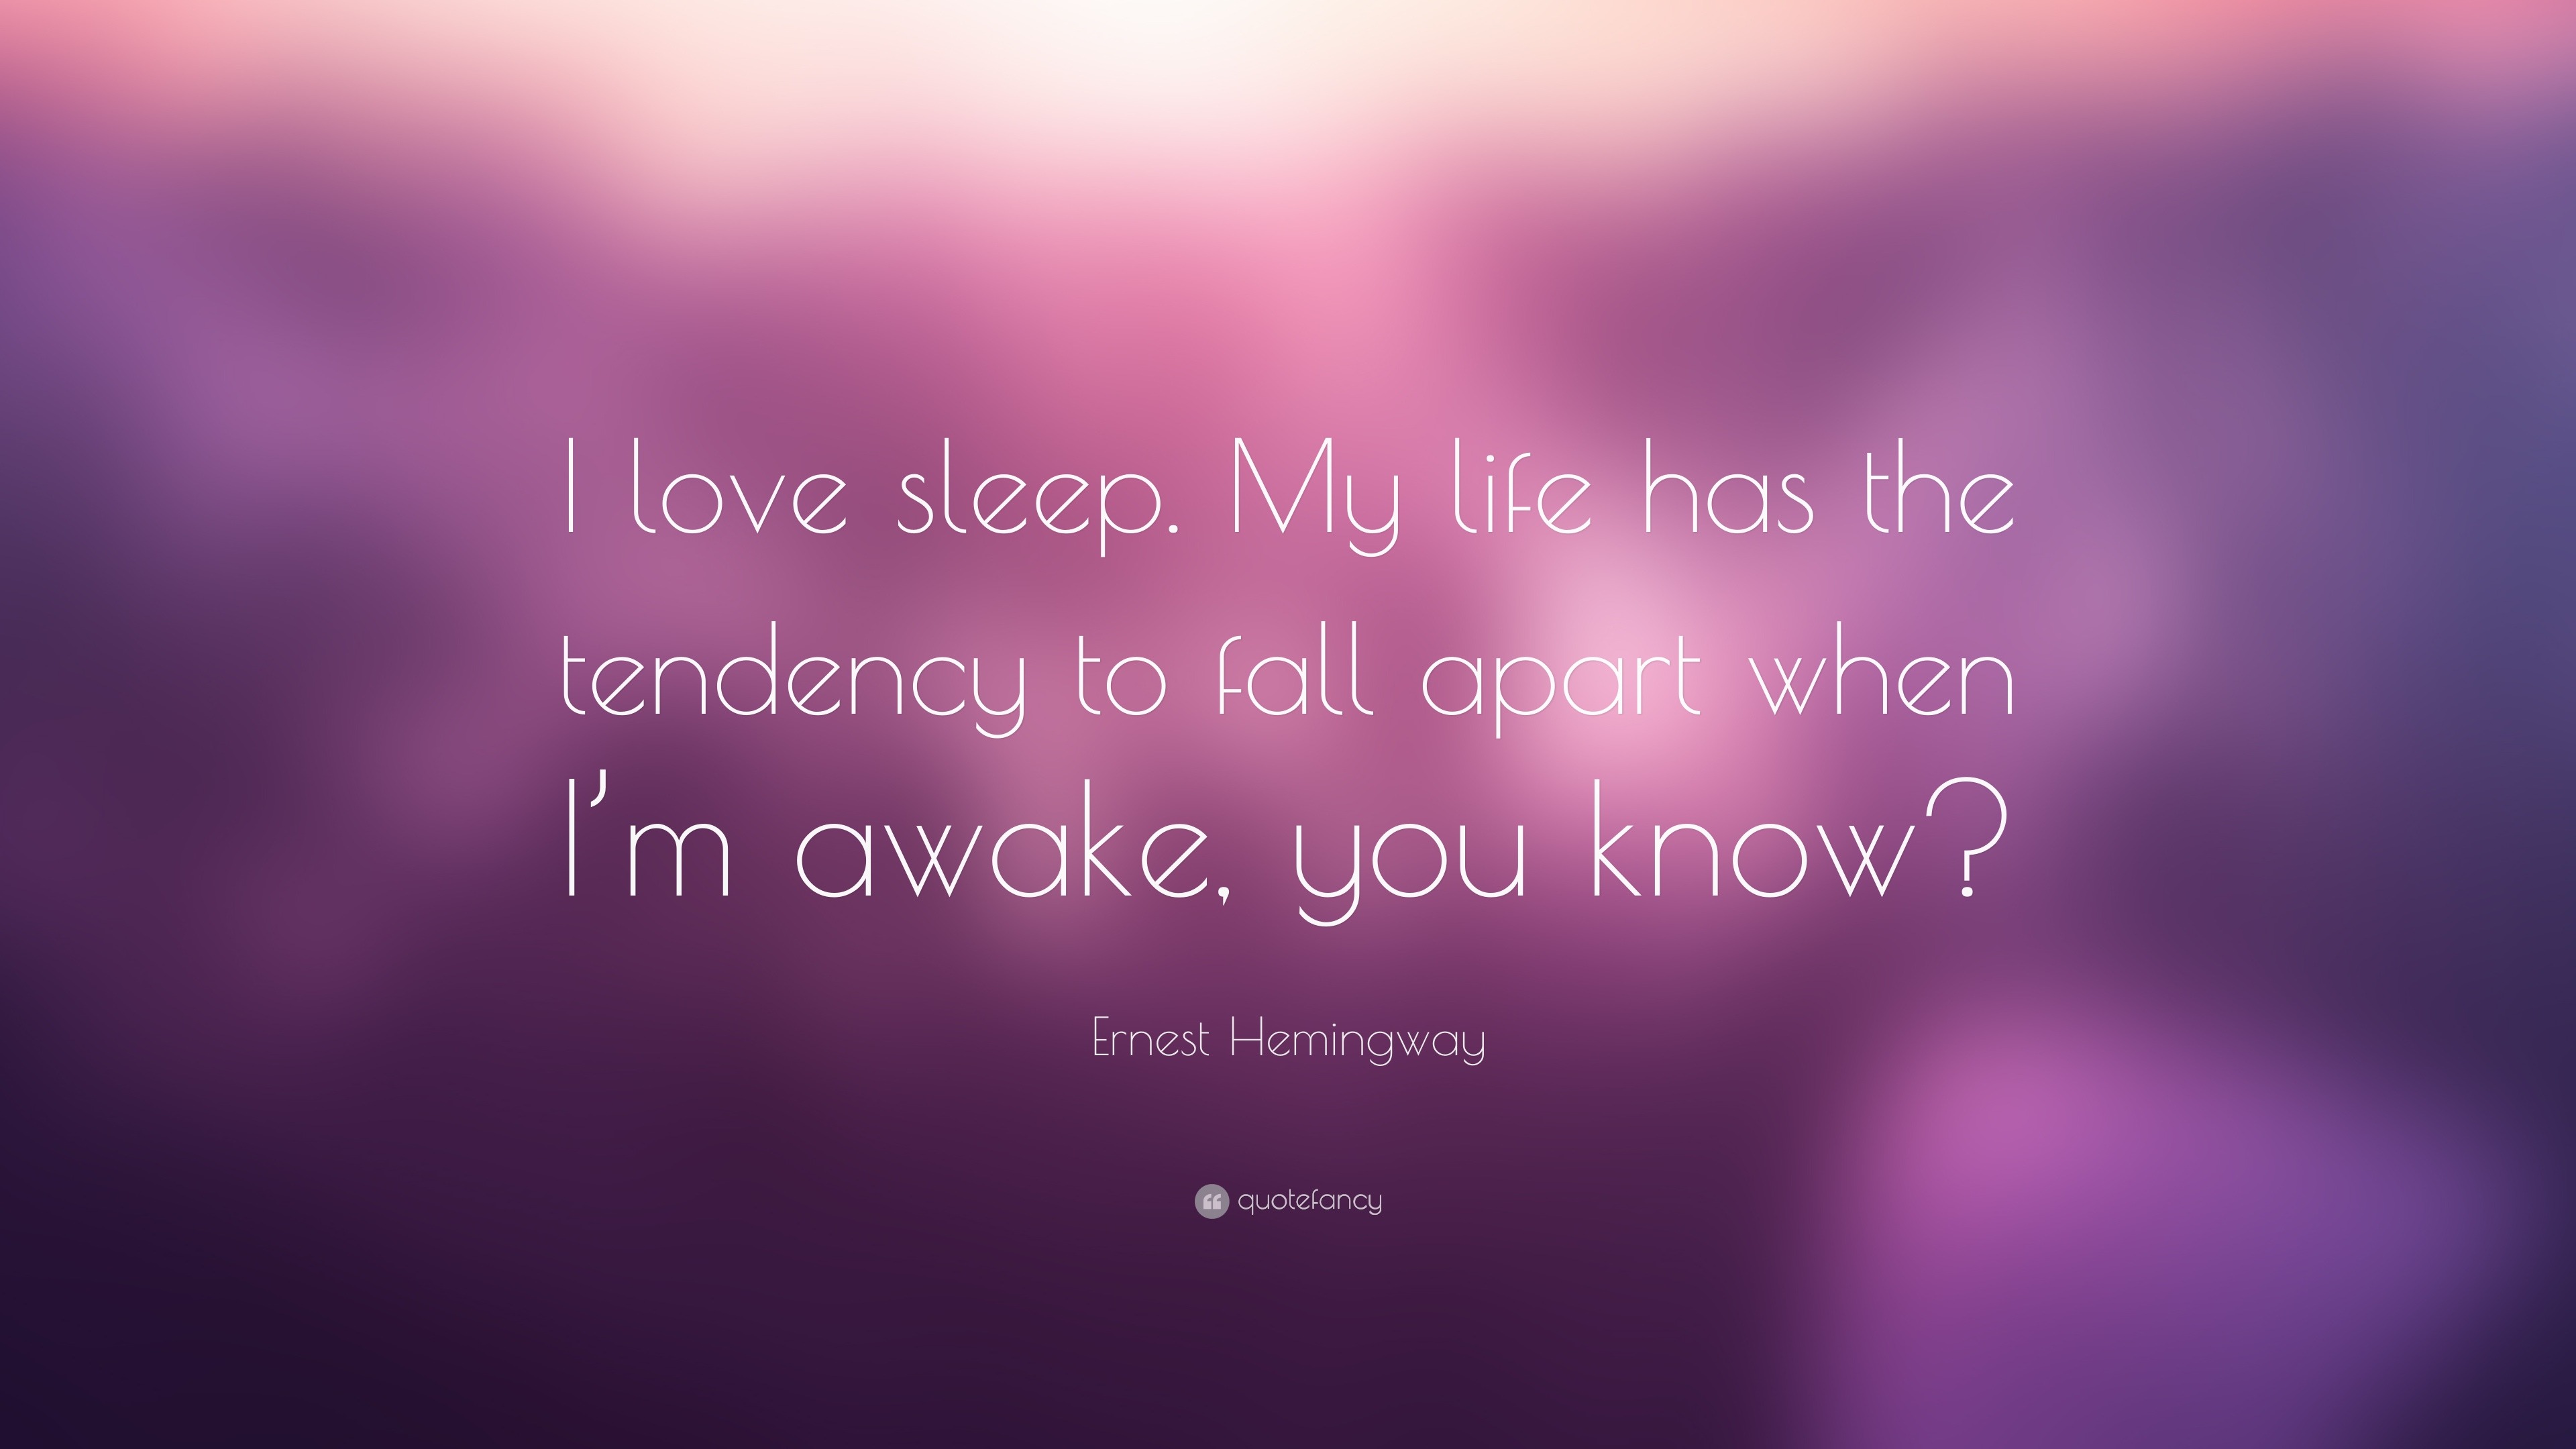 Ernest Hemingway Quote “I Love Sleep My Life Has The Tendency To